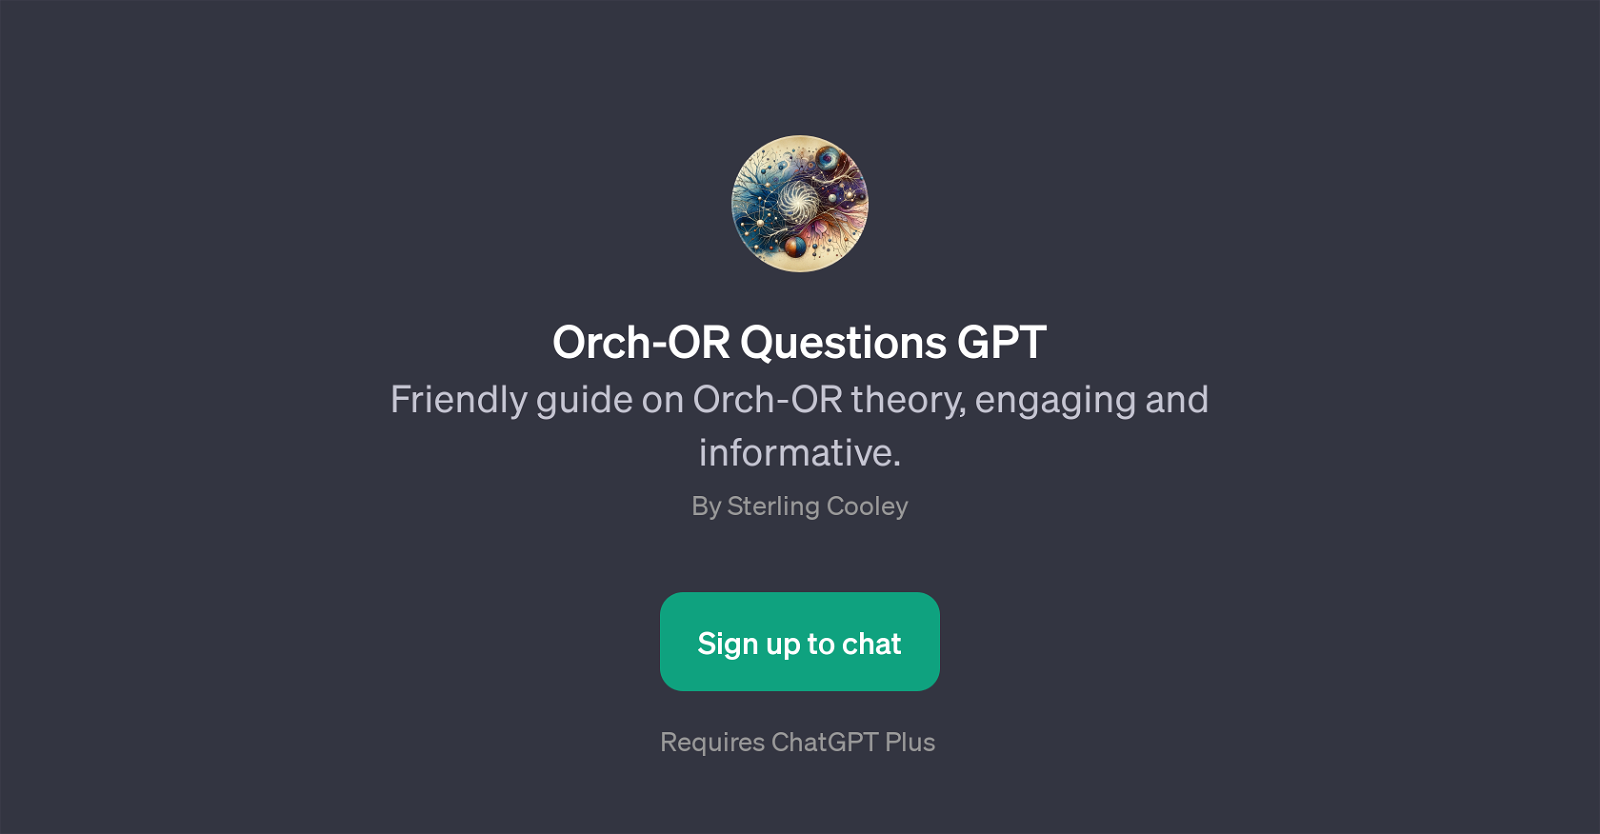 Orch-OR Questions GPT website